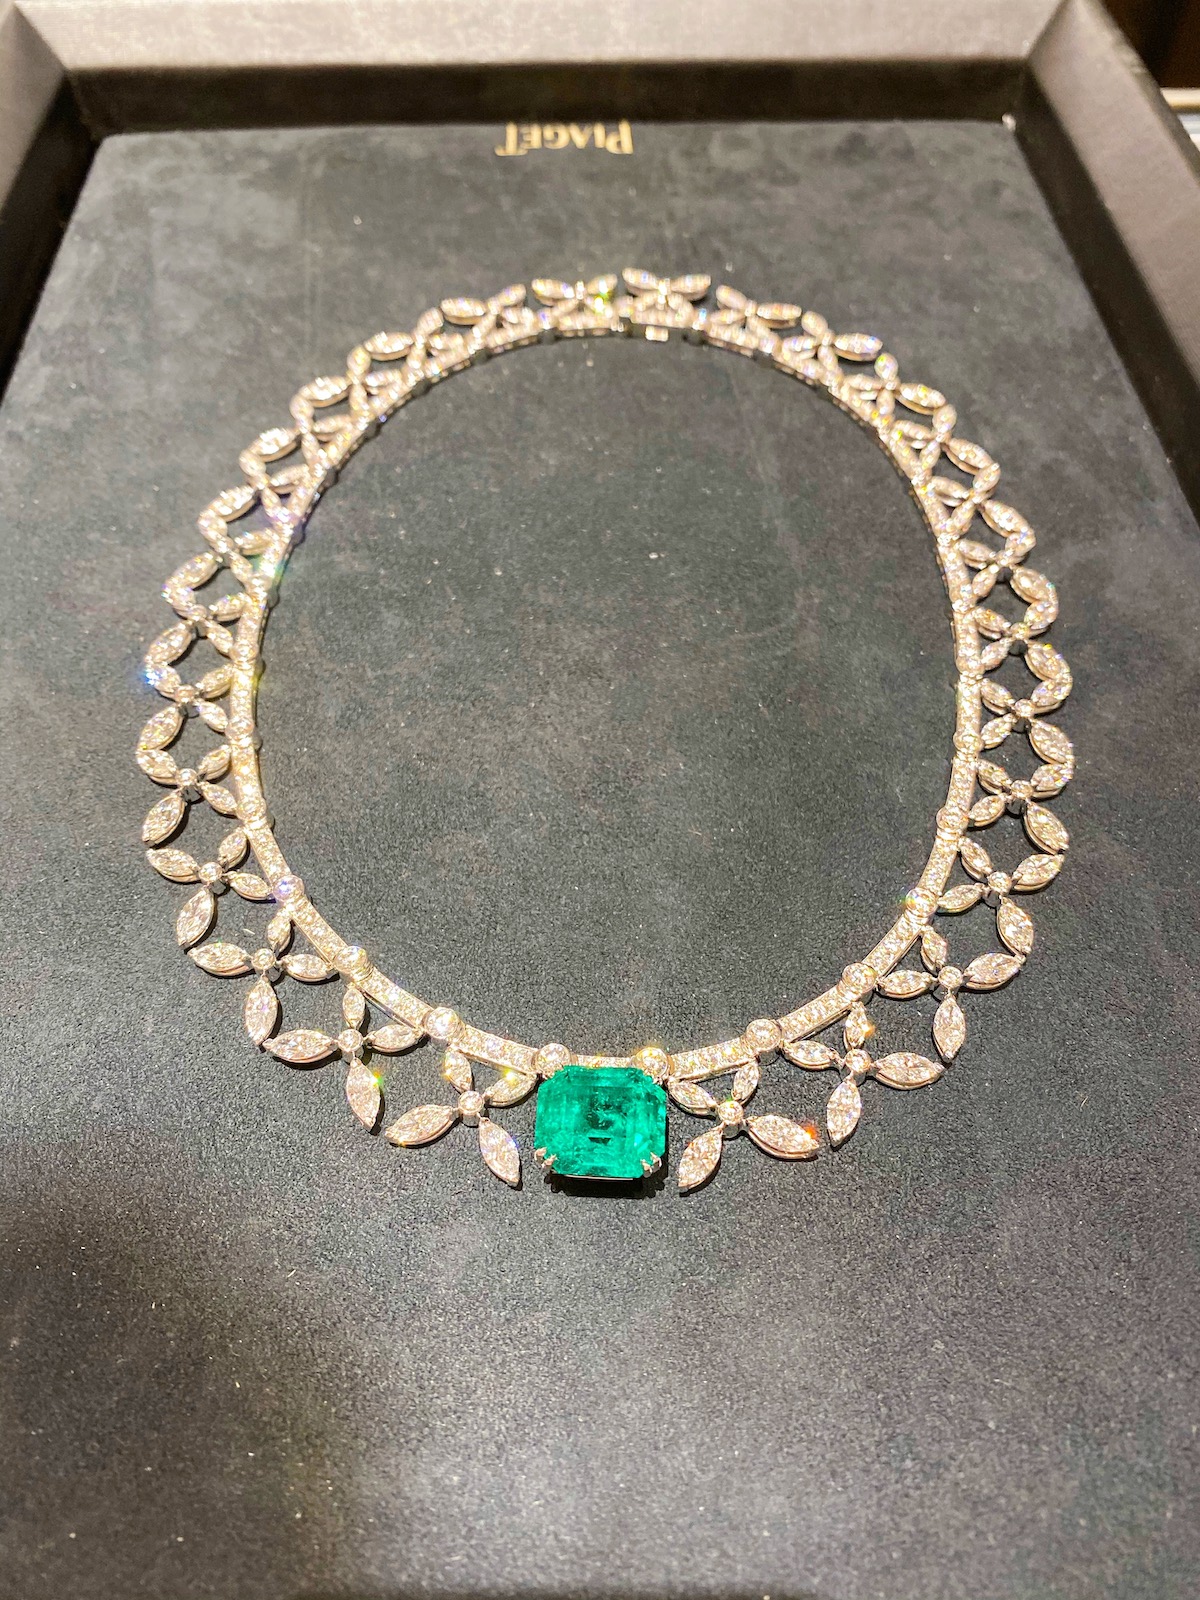 Piaget High Jewellery Emerald Necklace